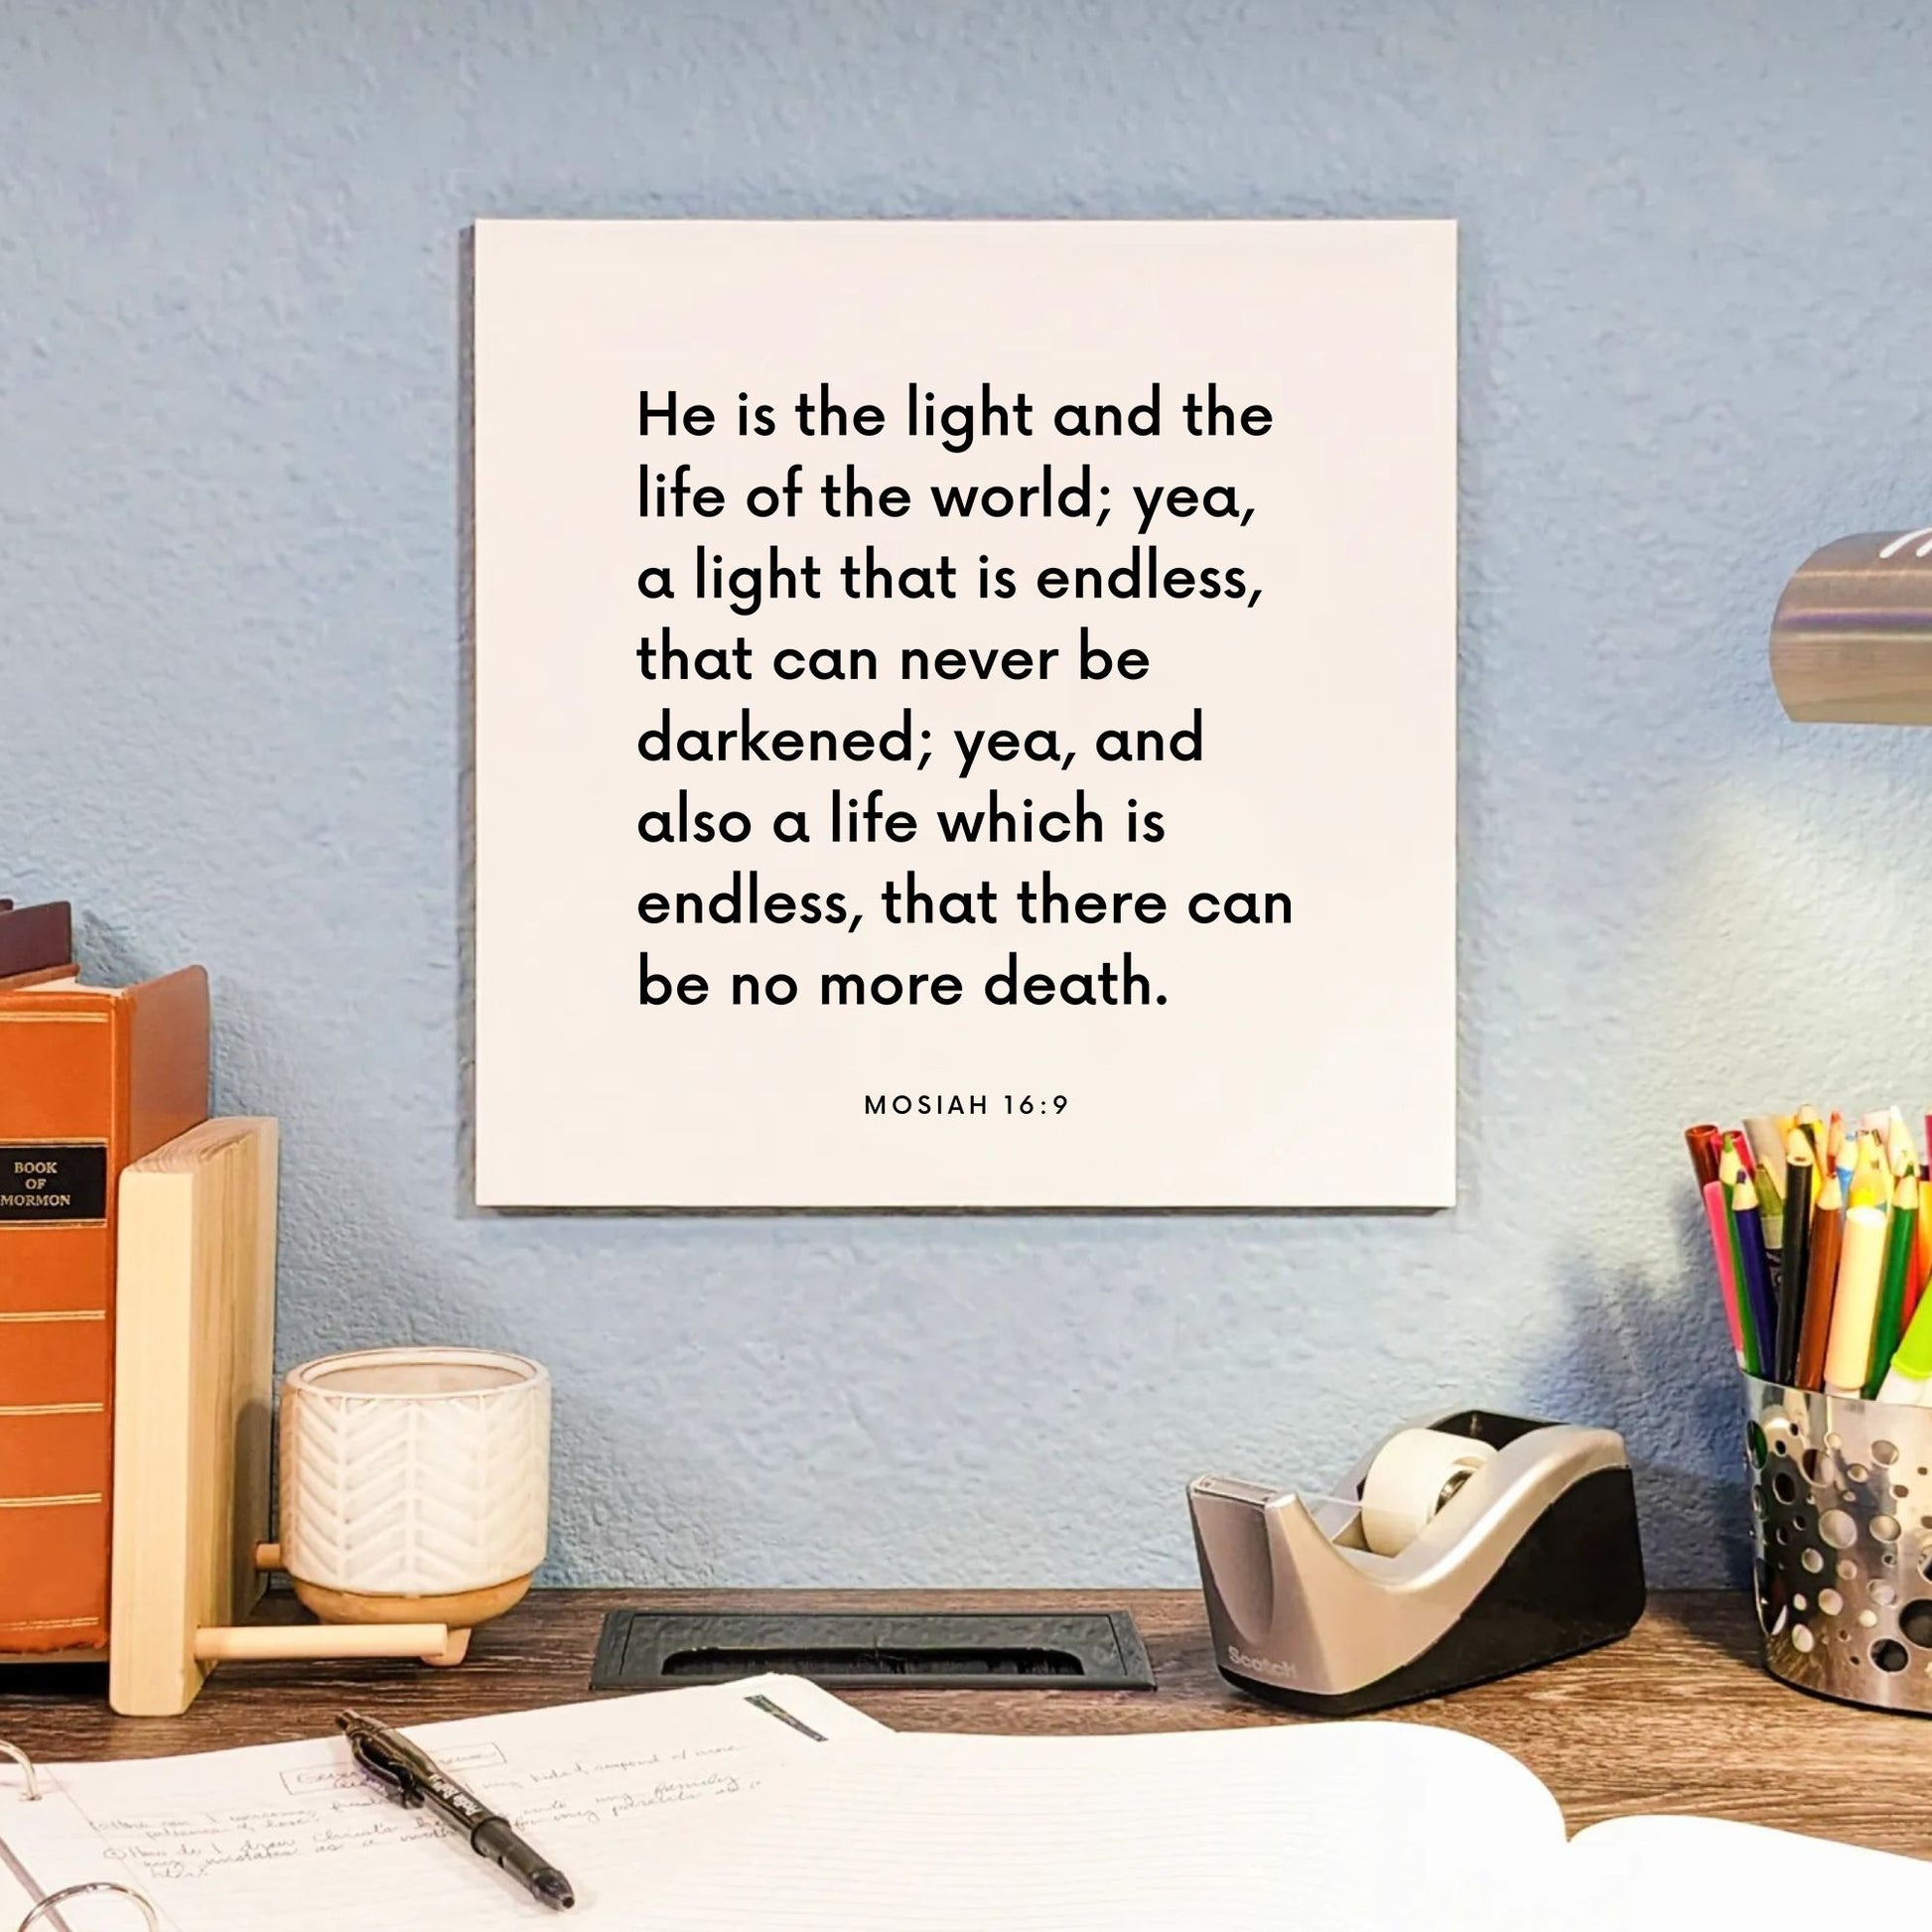 Desk mouting of the scripture tile for Mosiah 16:9 - "He is the light and the life of the world"